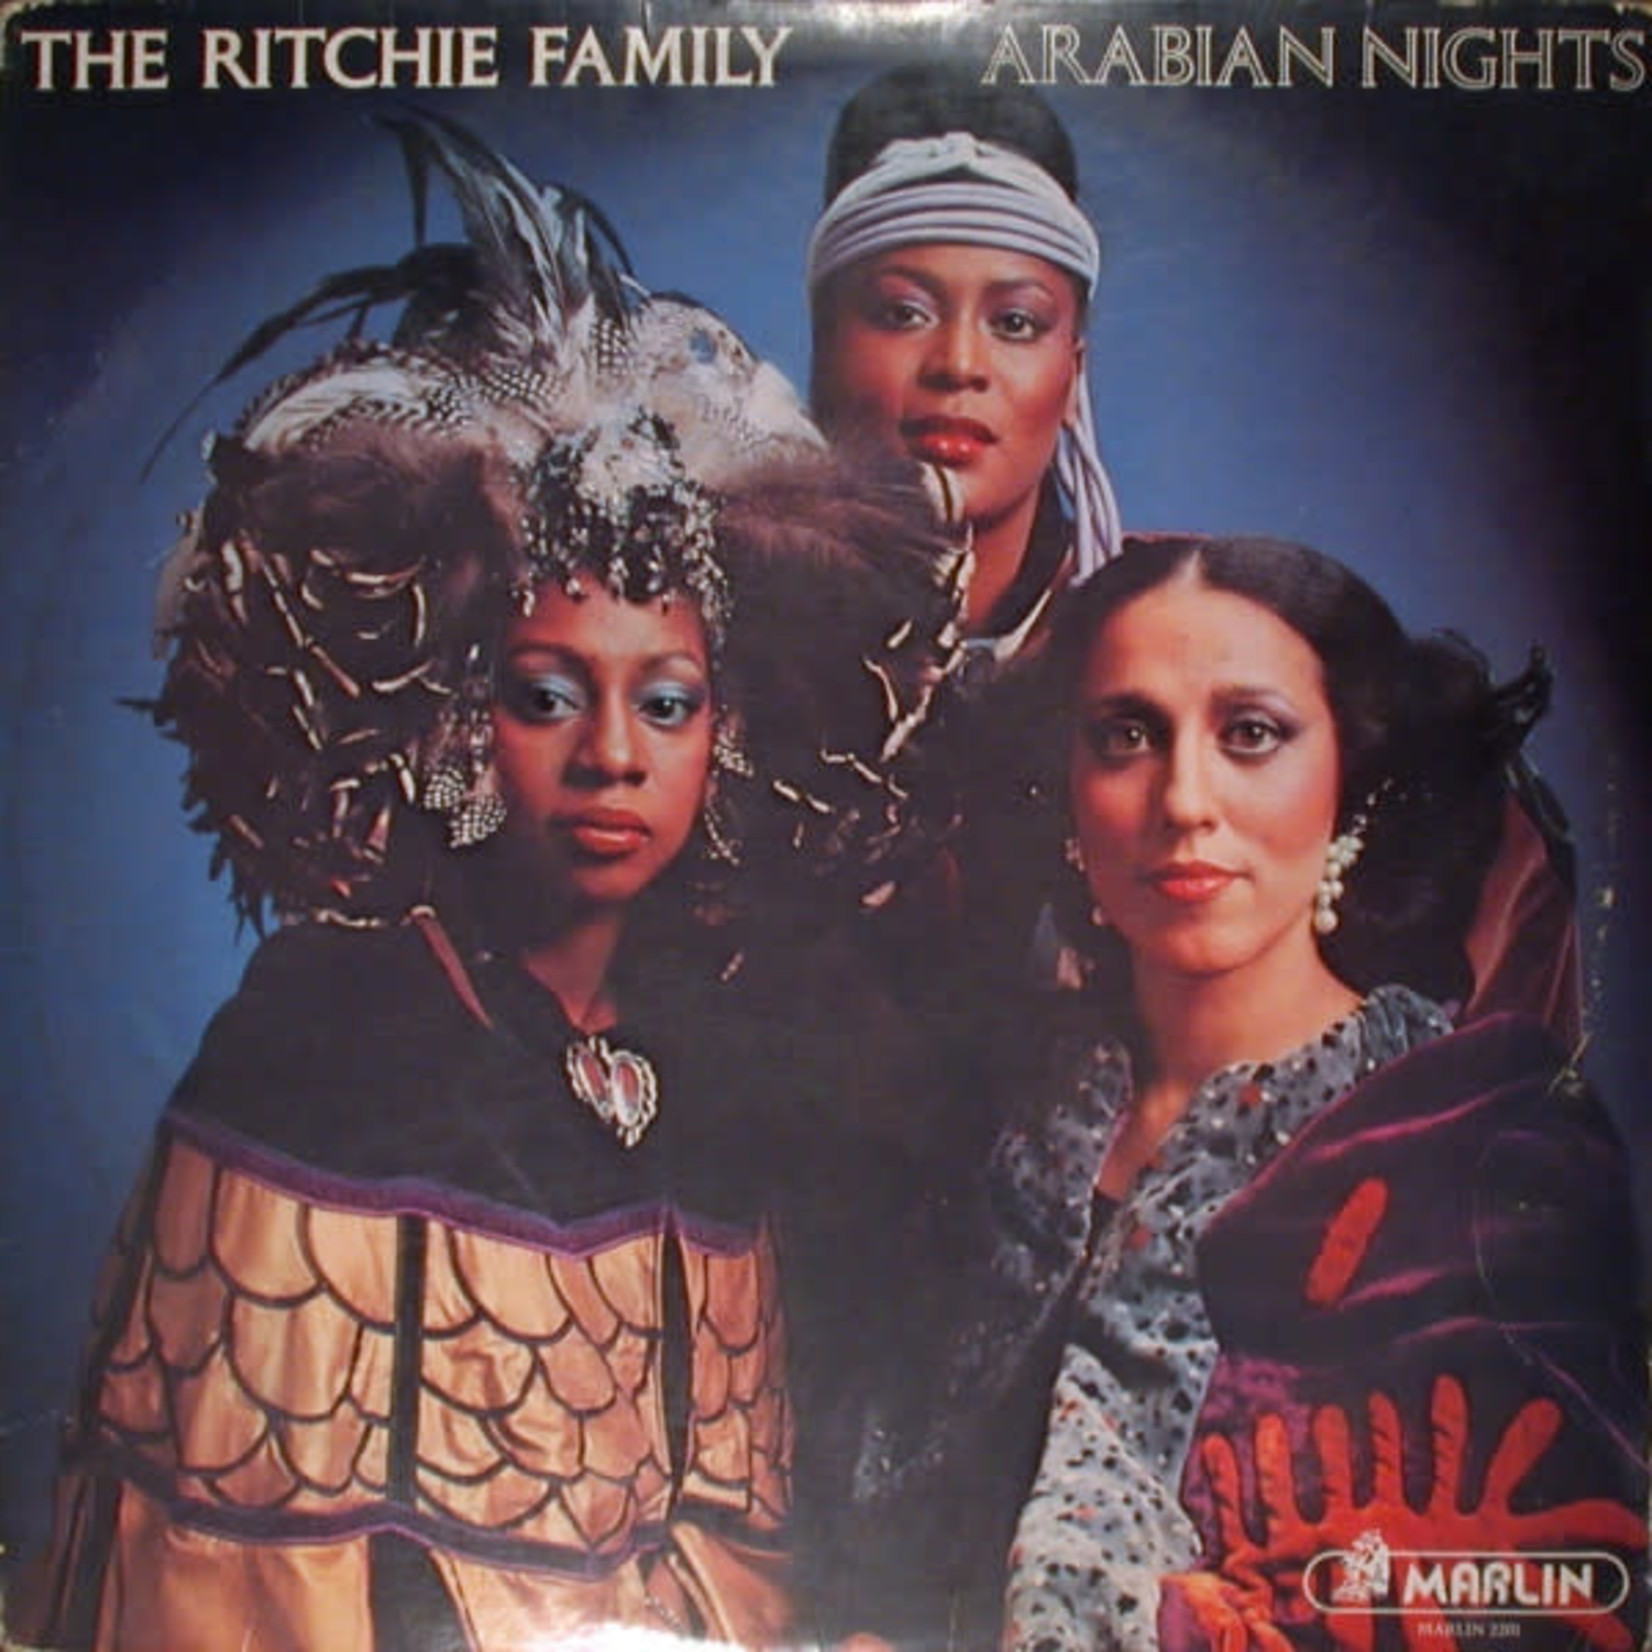 The Ritchie Family – Arabian Nights LP